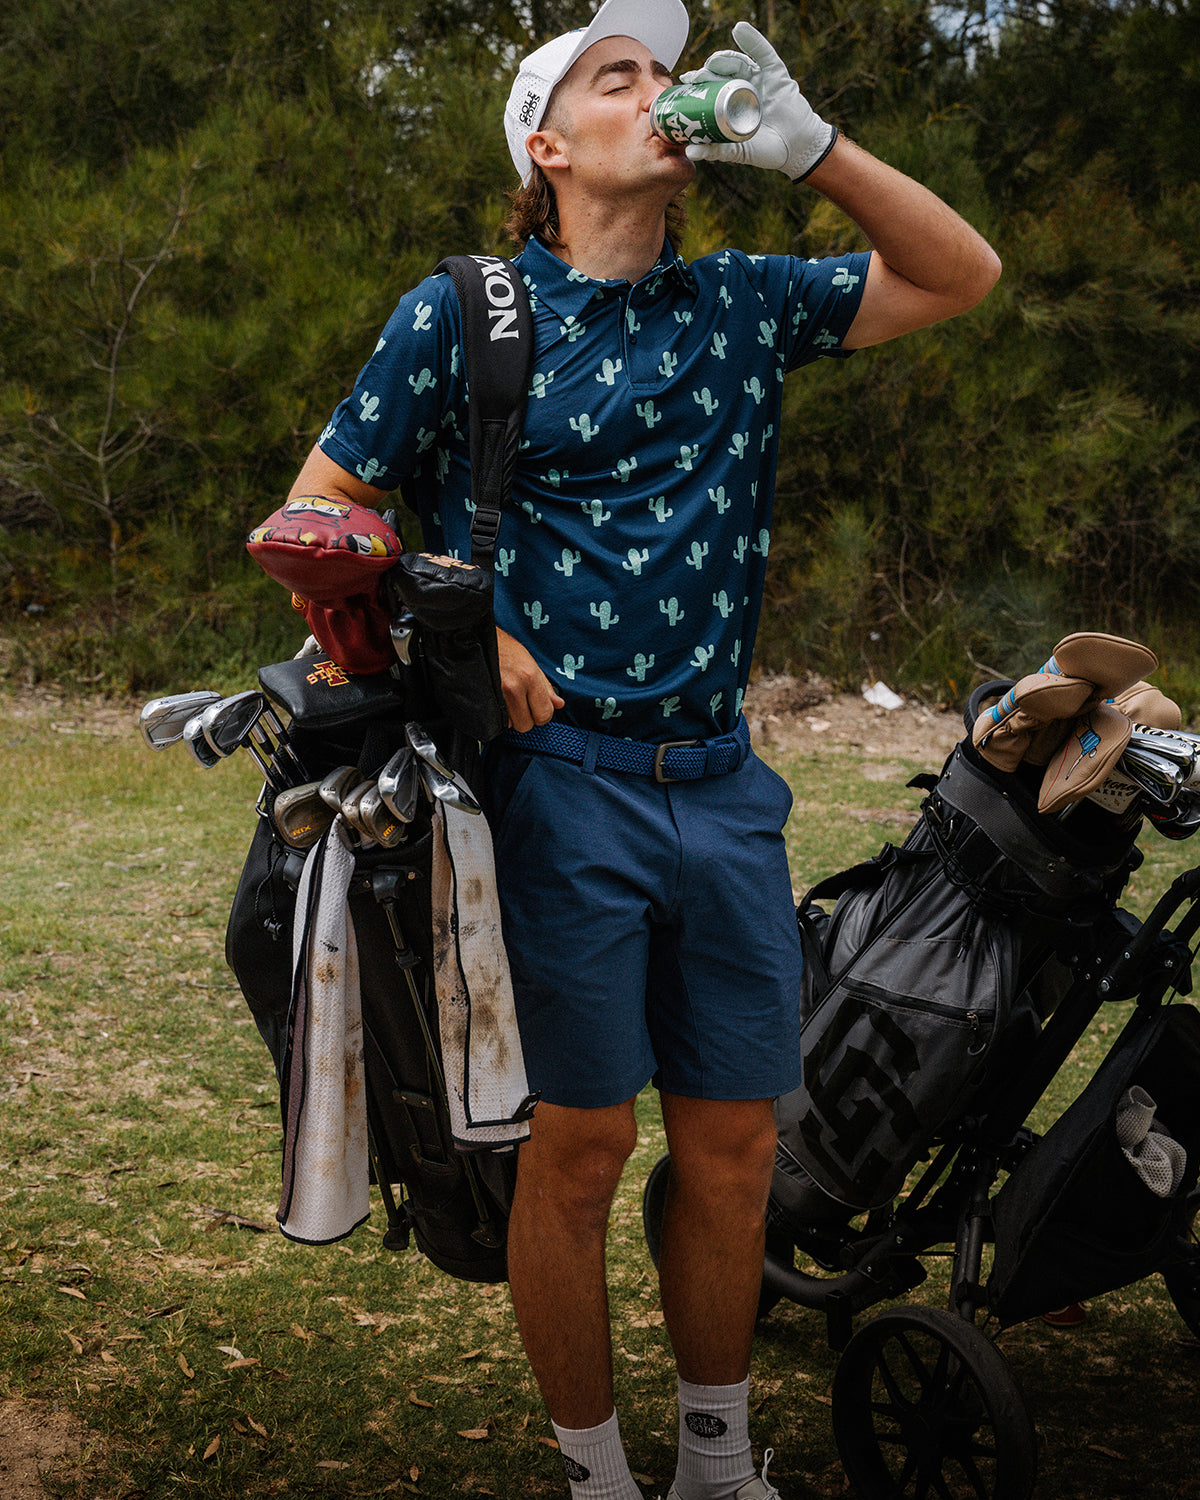 LIFE IS SERIOUS ENOUGH, GOLF DOESN’T NEED TO BE TOO